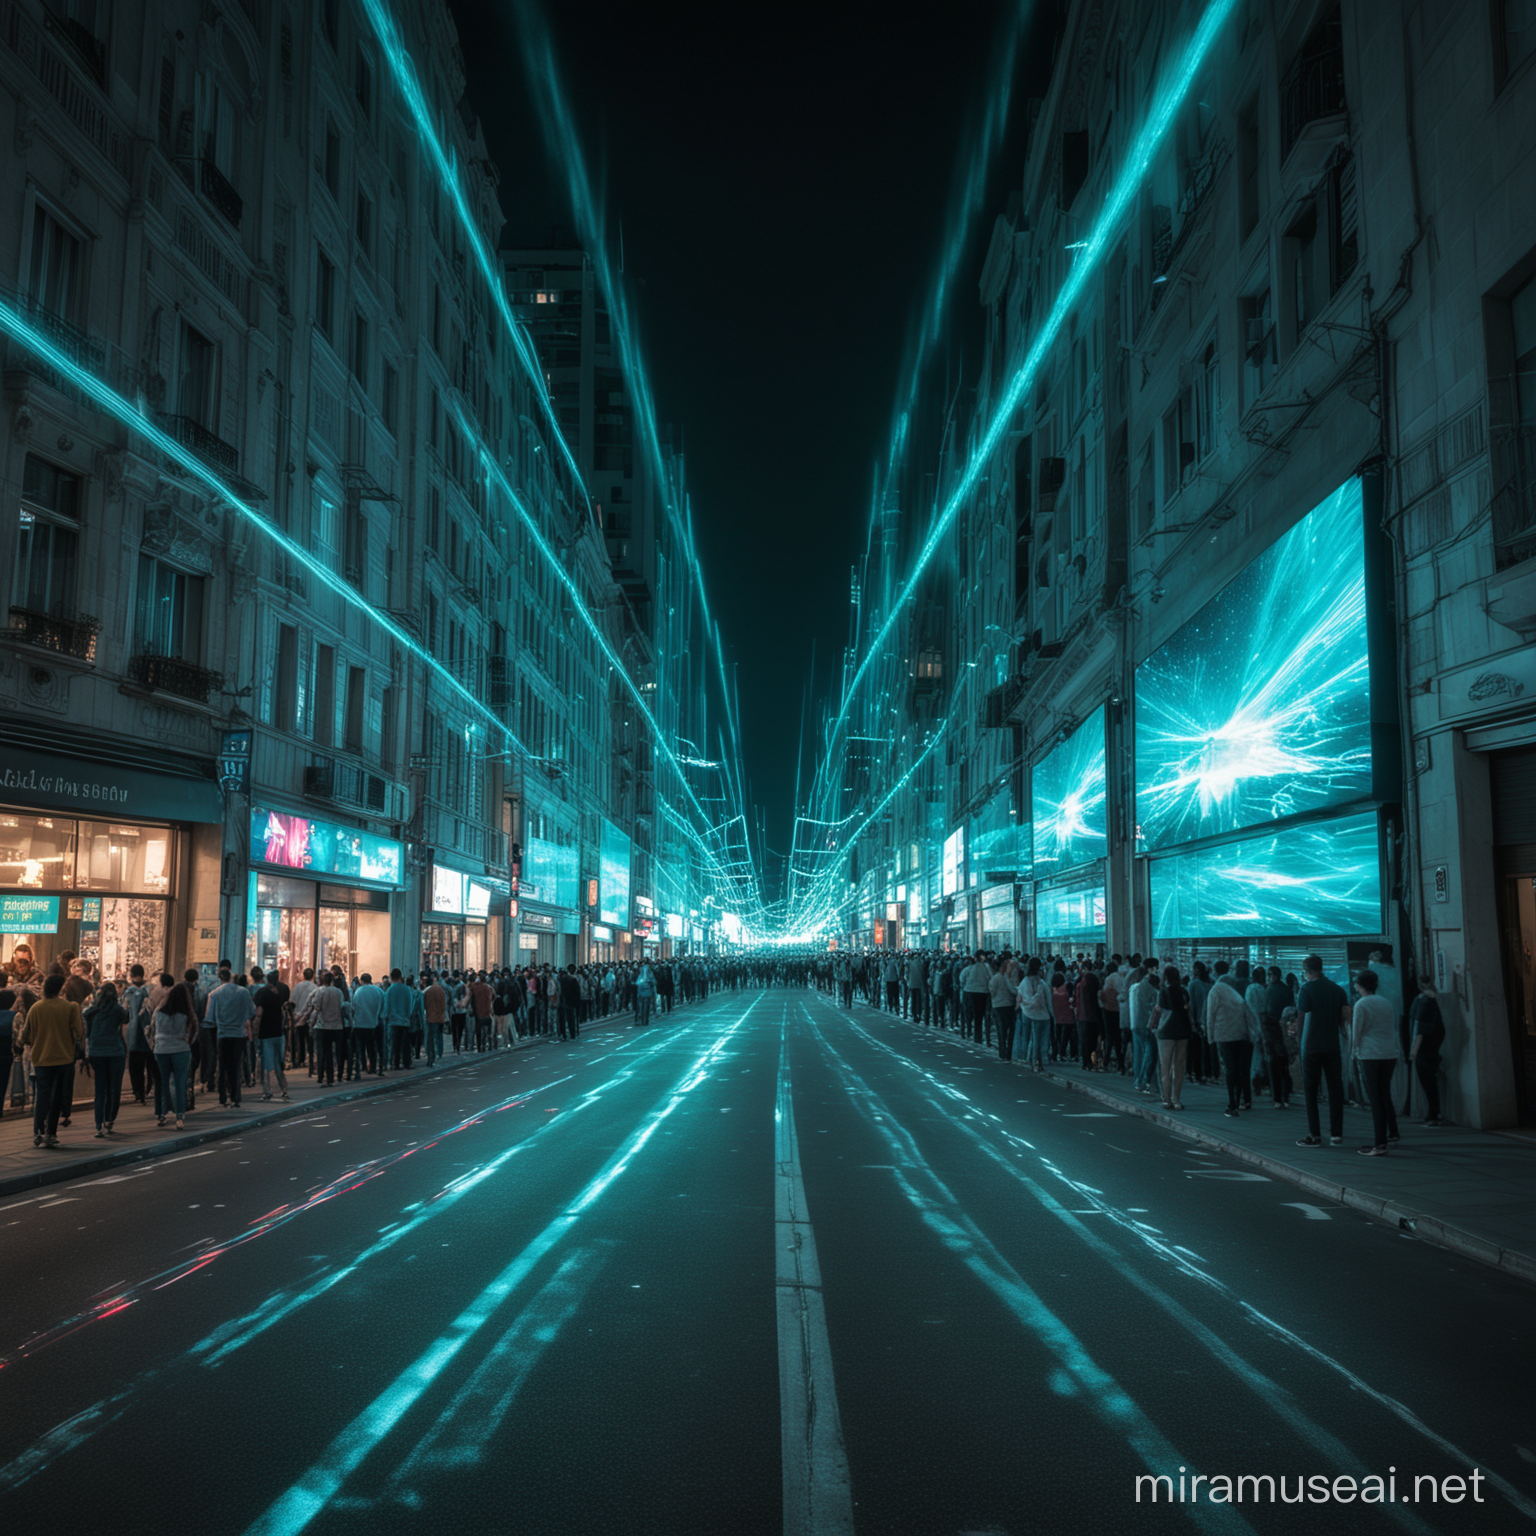 crowded street, led screens on the buildings, motion blur, long shutter, photograph, night, turquoise lighting,turquoise laser show at the sky